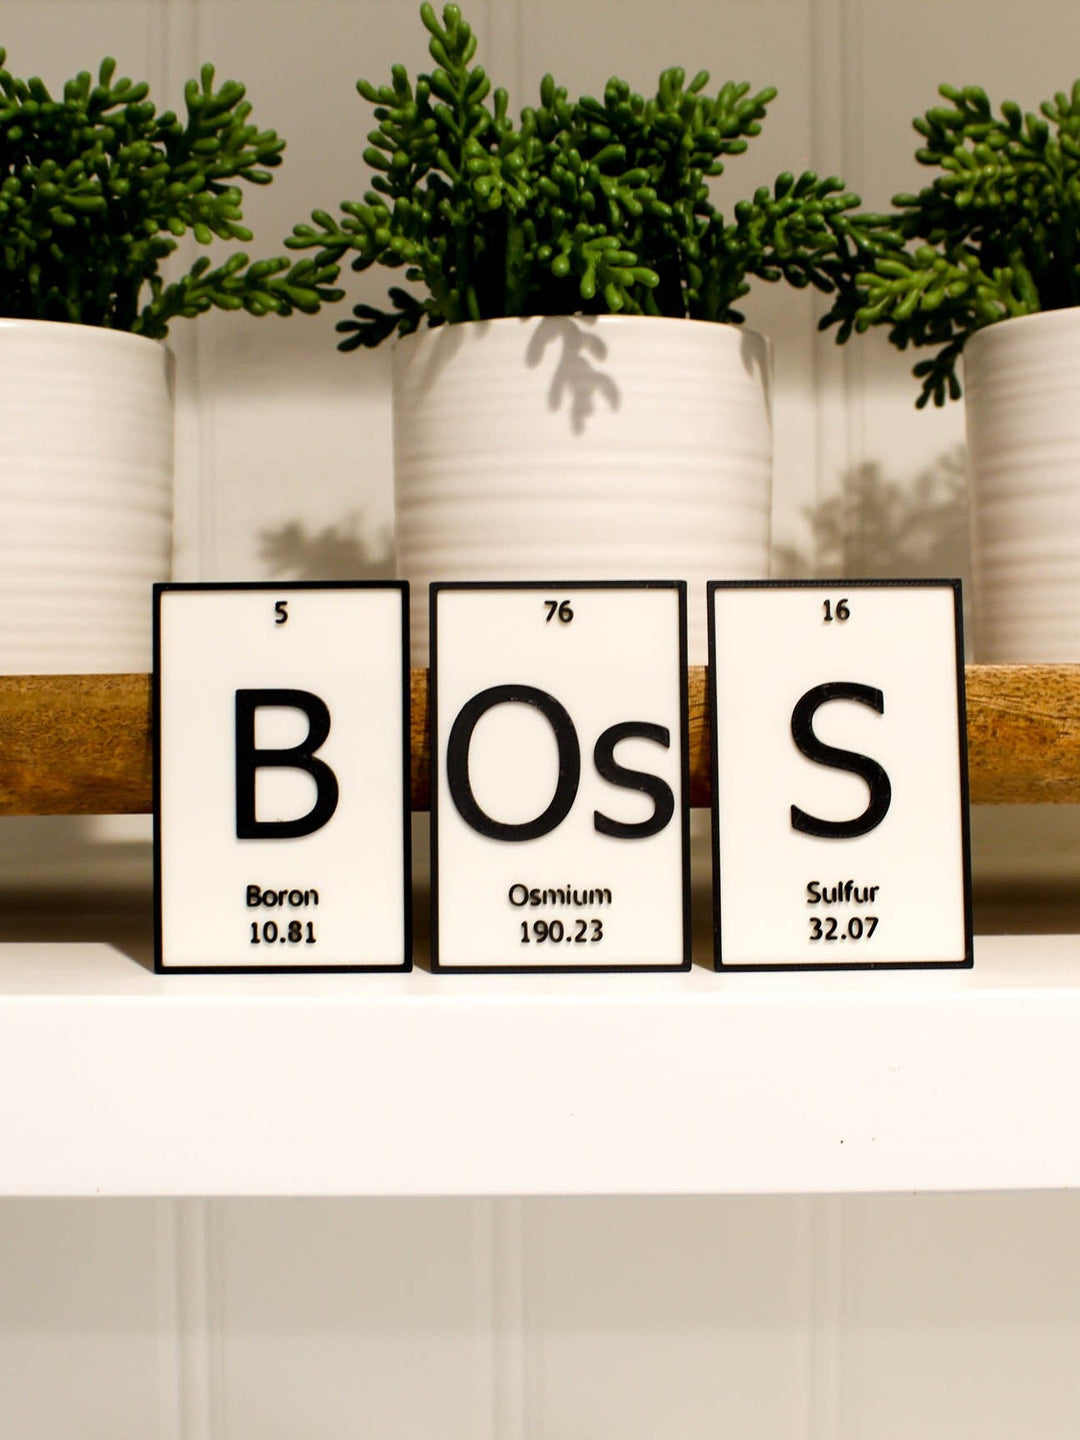 
  
  BOsS | Periodic Table of Elements Wall, Desk or Shelf Sign
  
